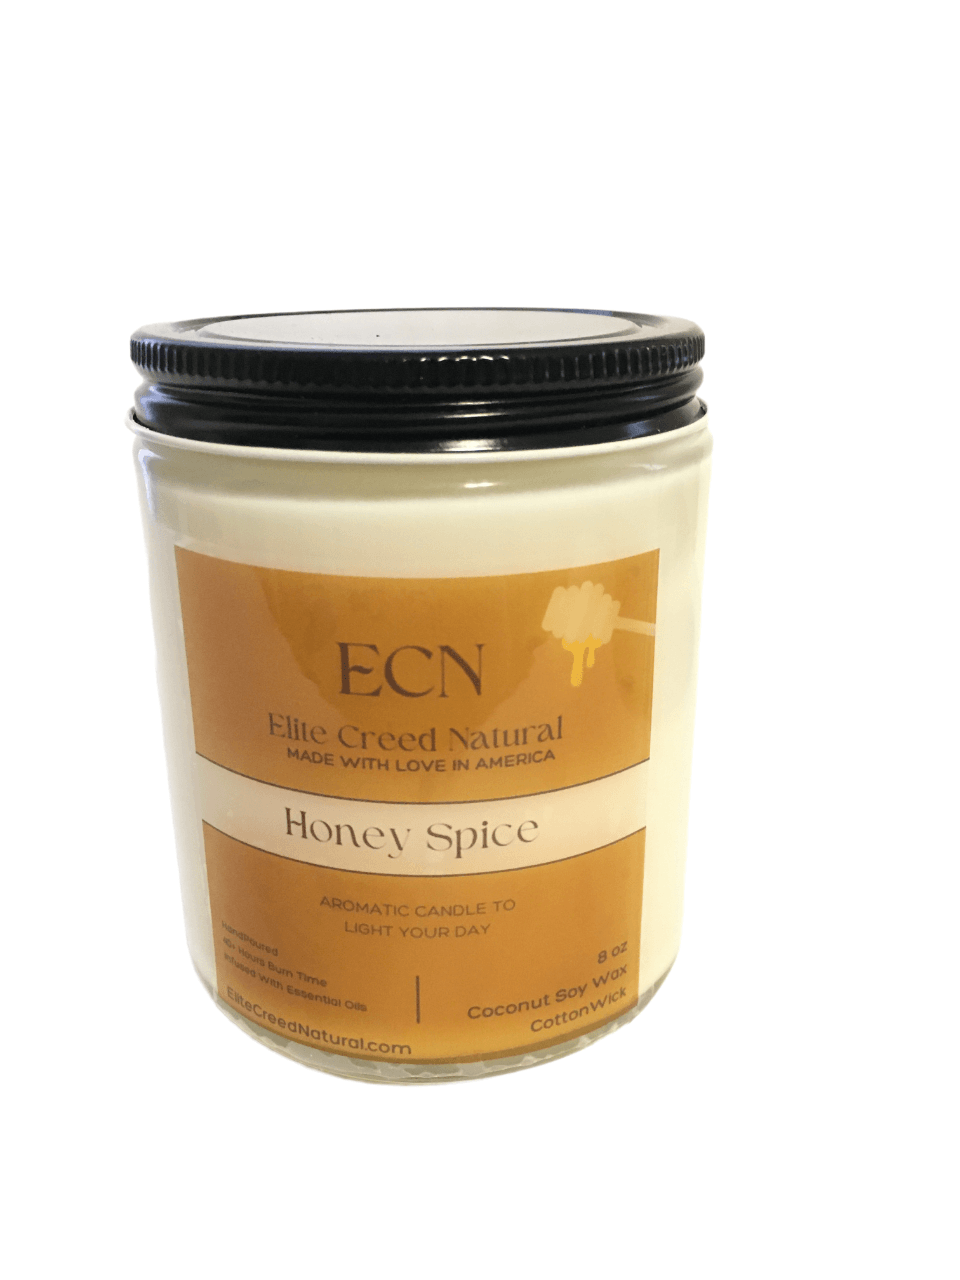 Honey Spice Candle Elite Creed Natural